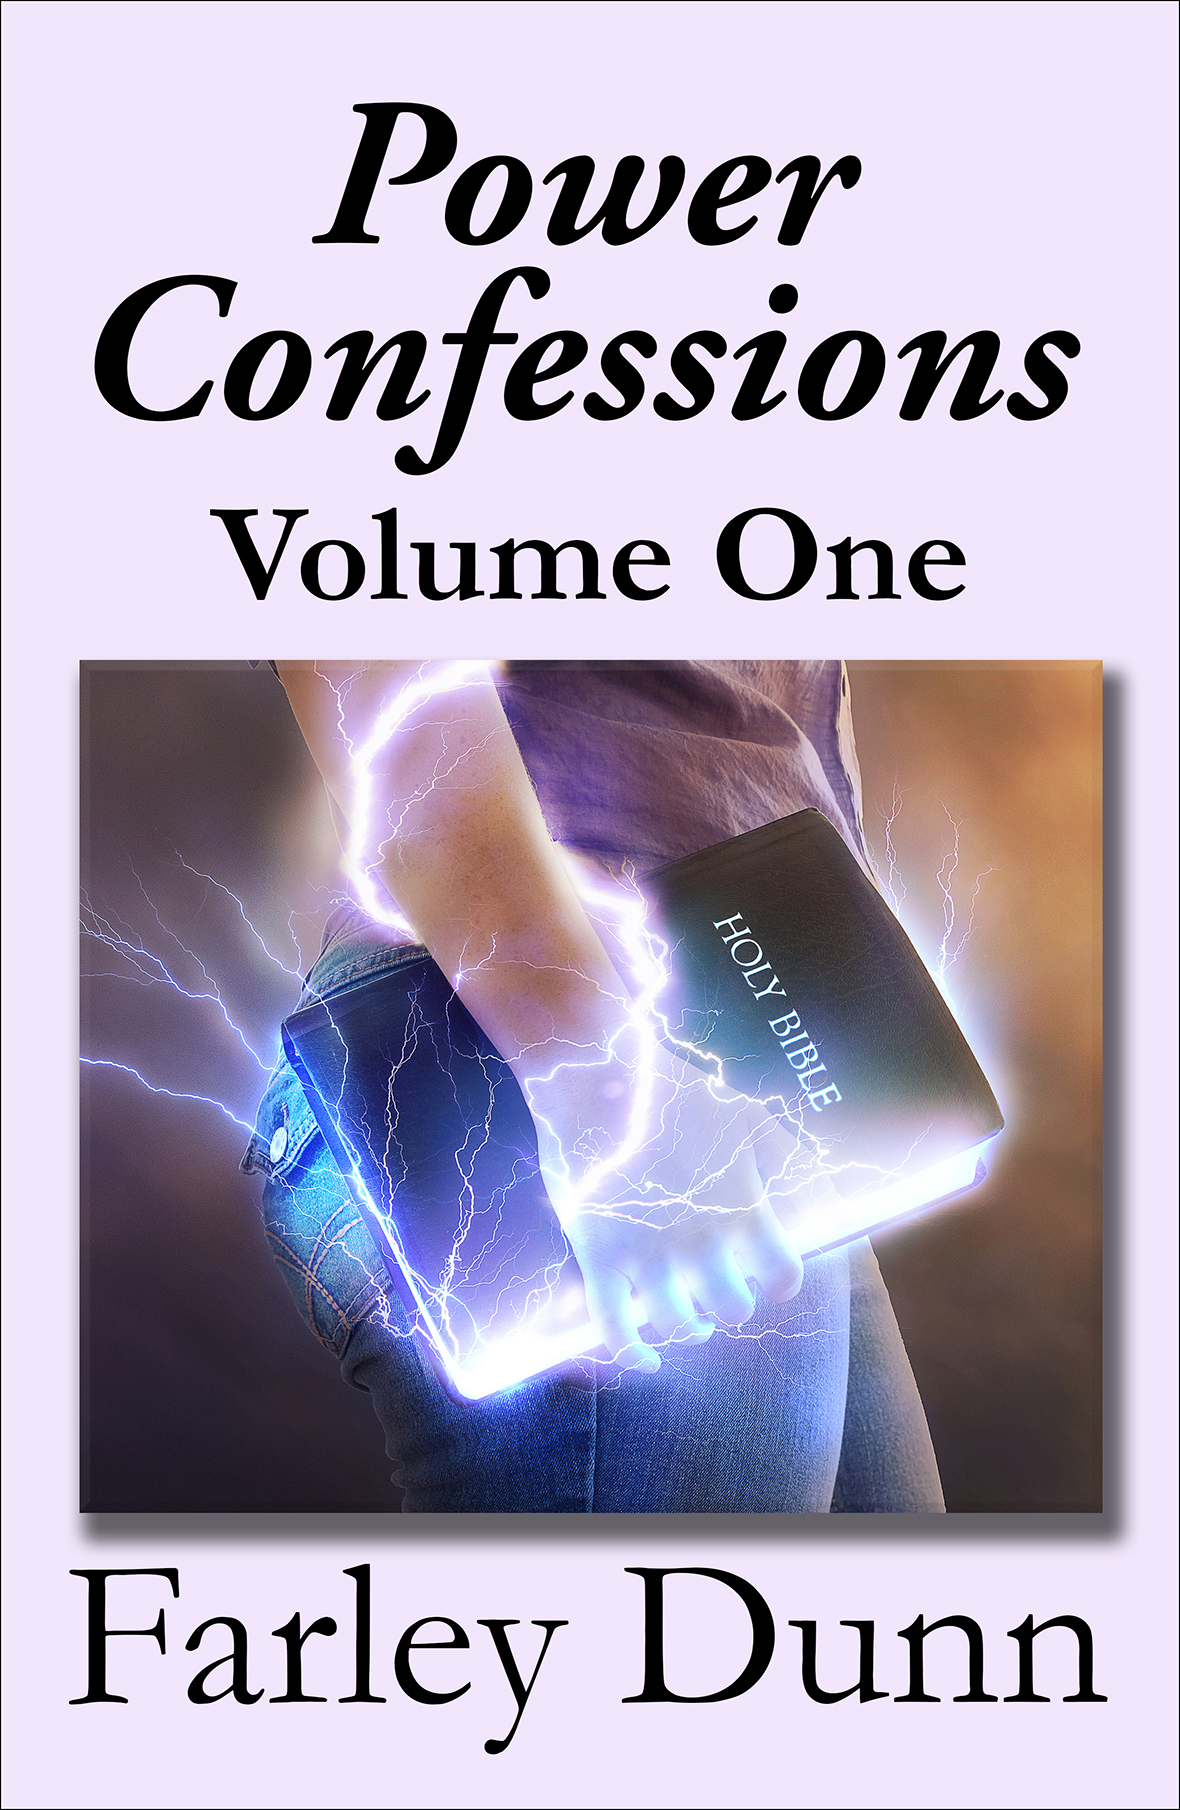 Power Confessions Volume One Cover Front V2 for web insertion